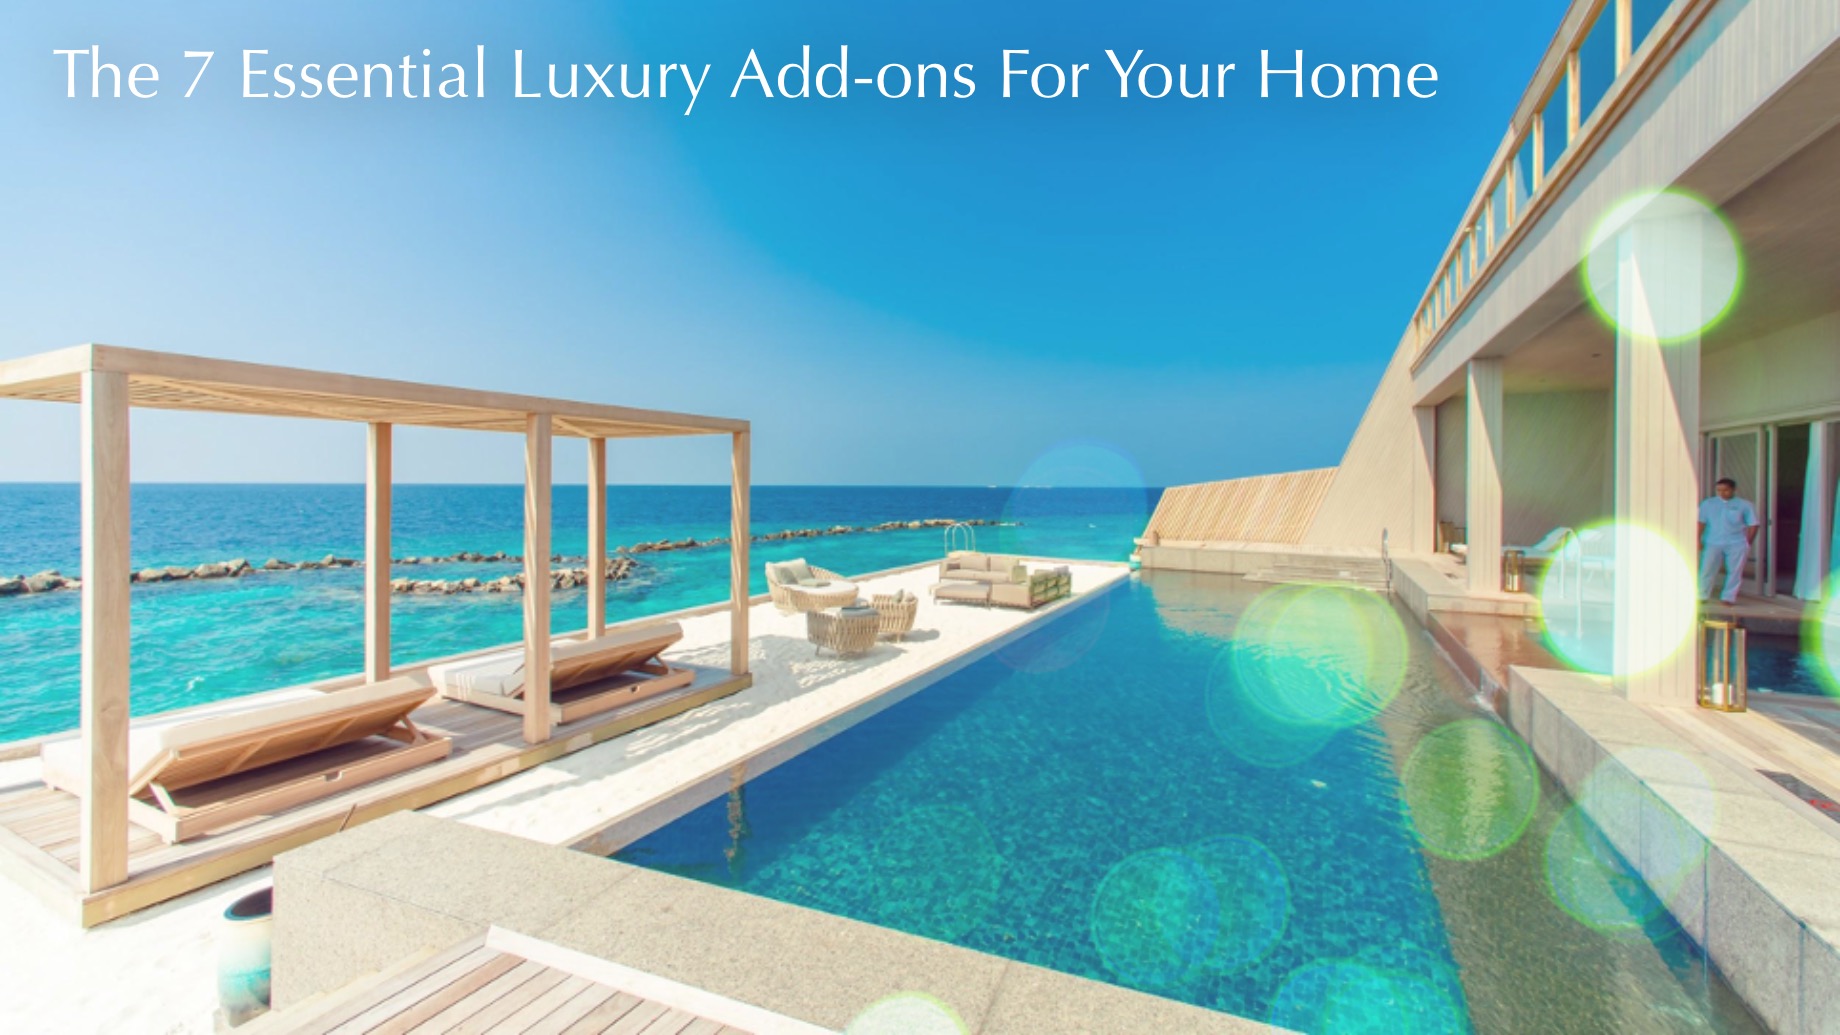 The 7 Essential Luxury Add-ons For Your Home